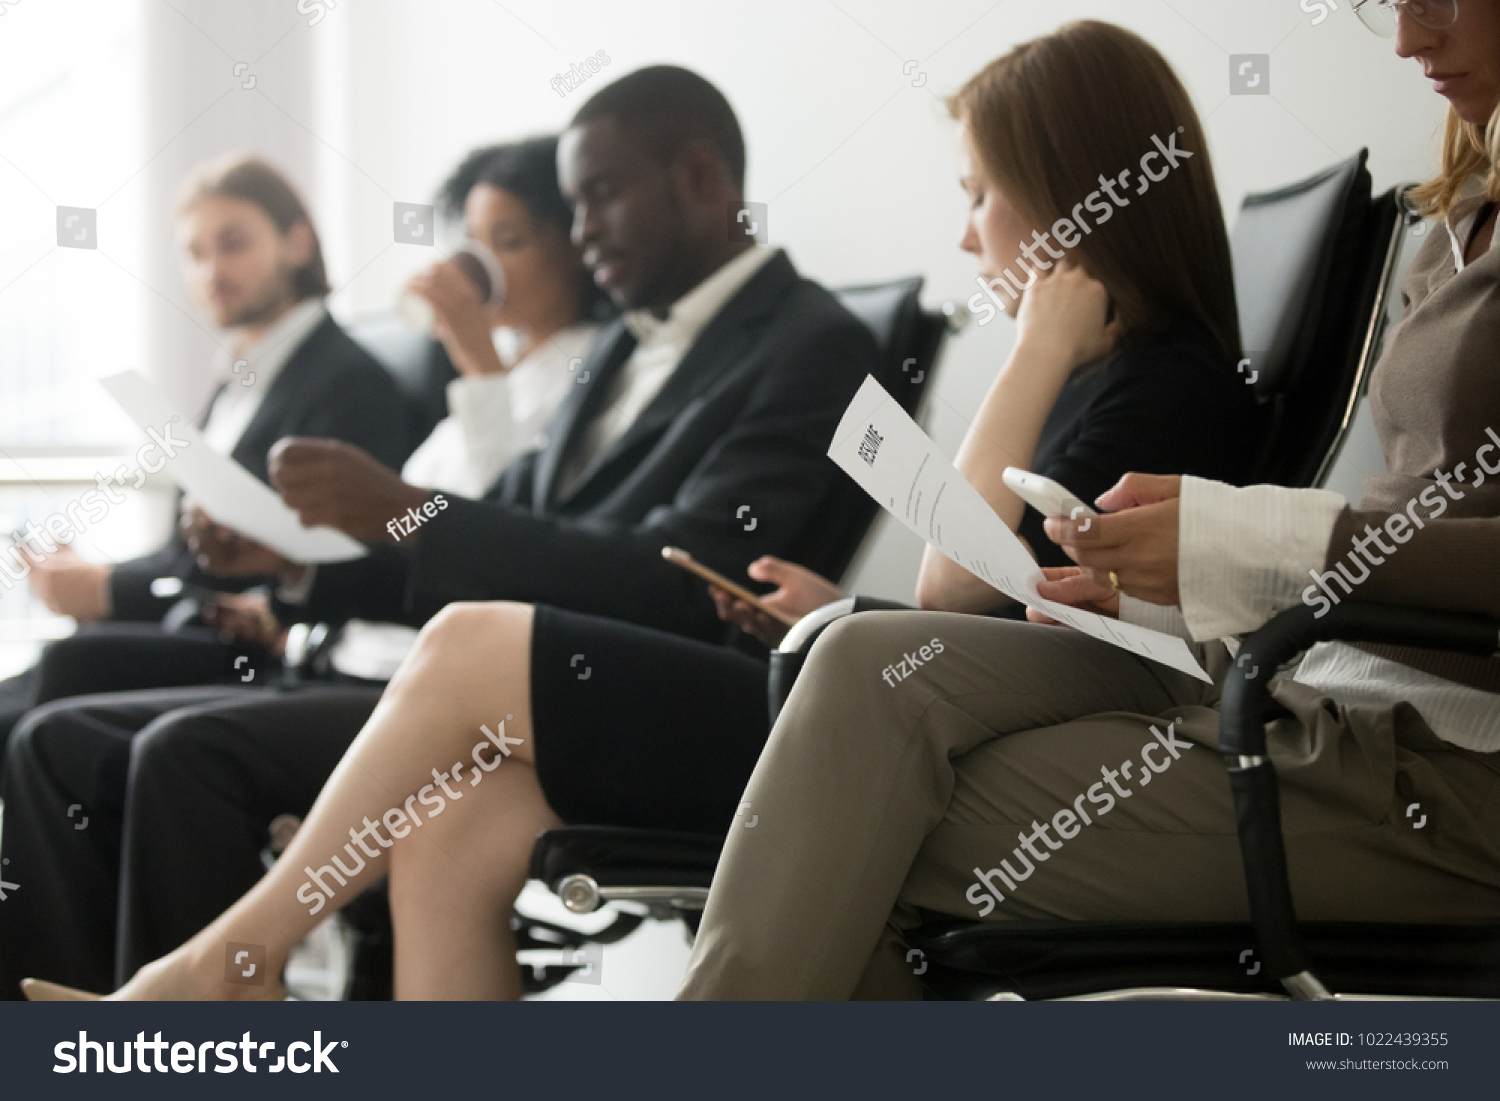 Multi-ethnic applicants sitting in queue preparing for interview, black and white vacancy candidates waiting on chairs holding resume using smartphones, human resources, hiring and job search concept #1022439355